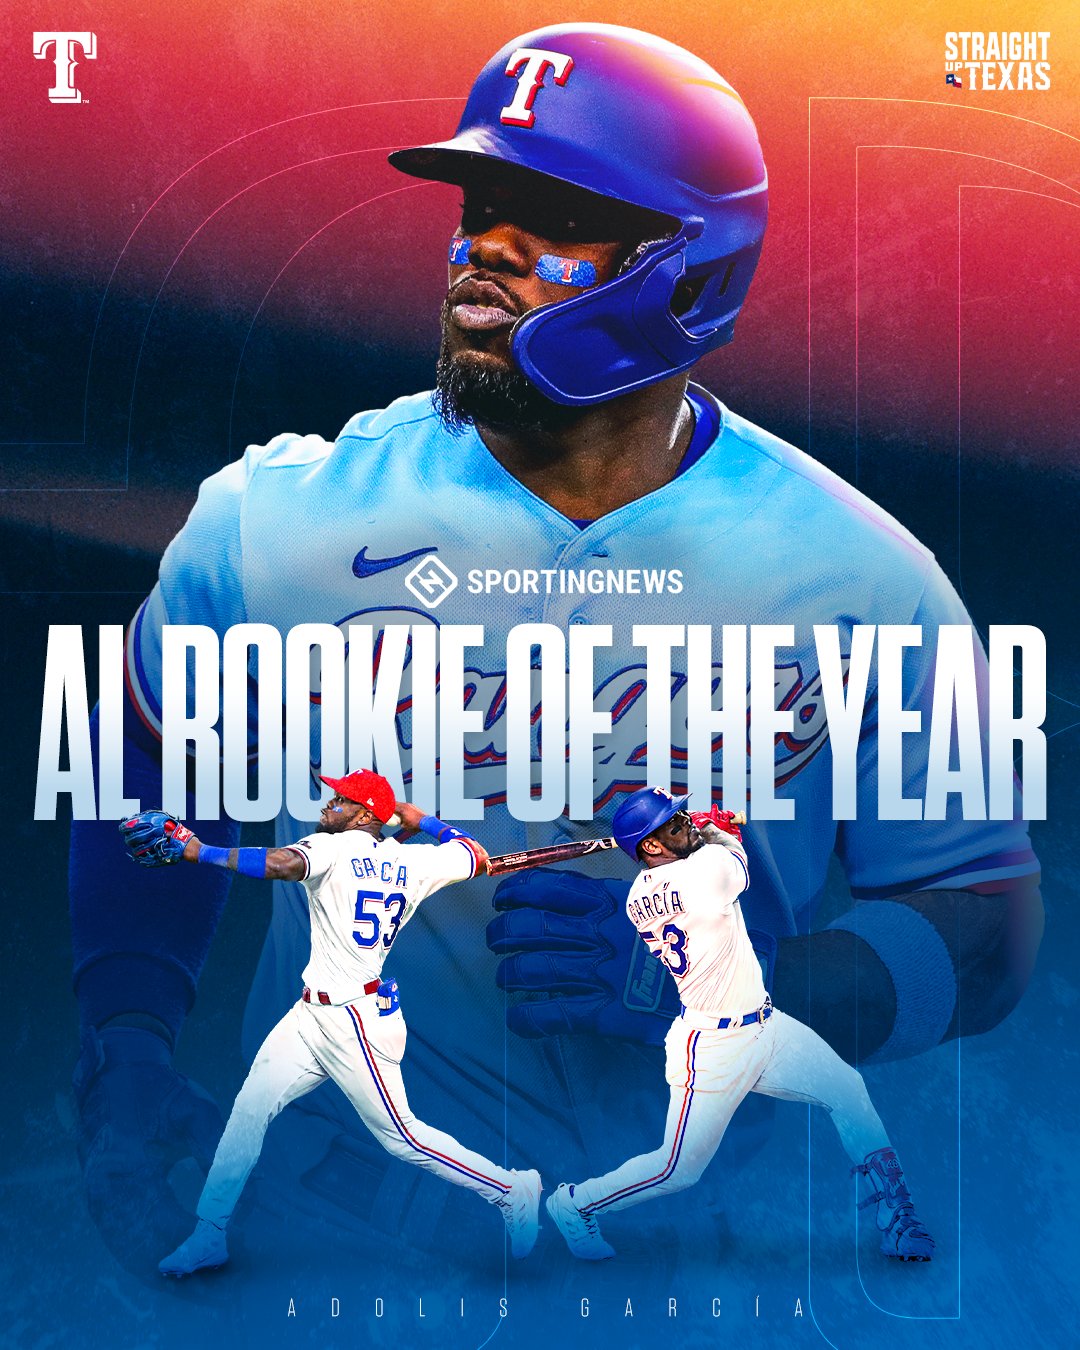 Texas Rangers on X: Your 2021 @sportingnews AL Rookie of the Year